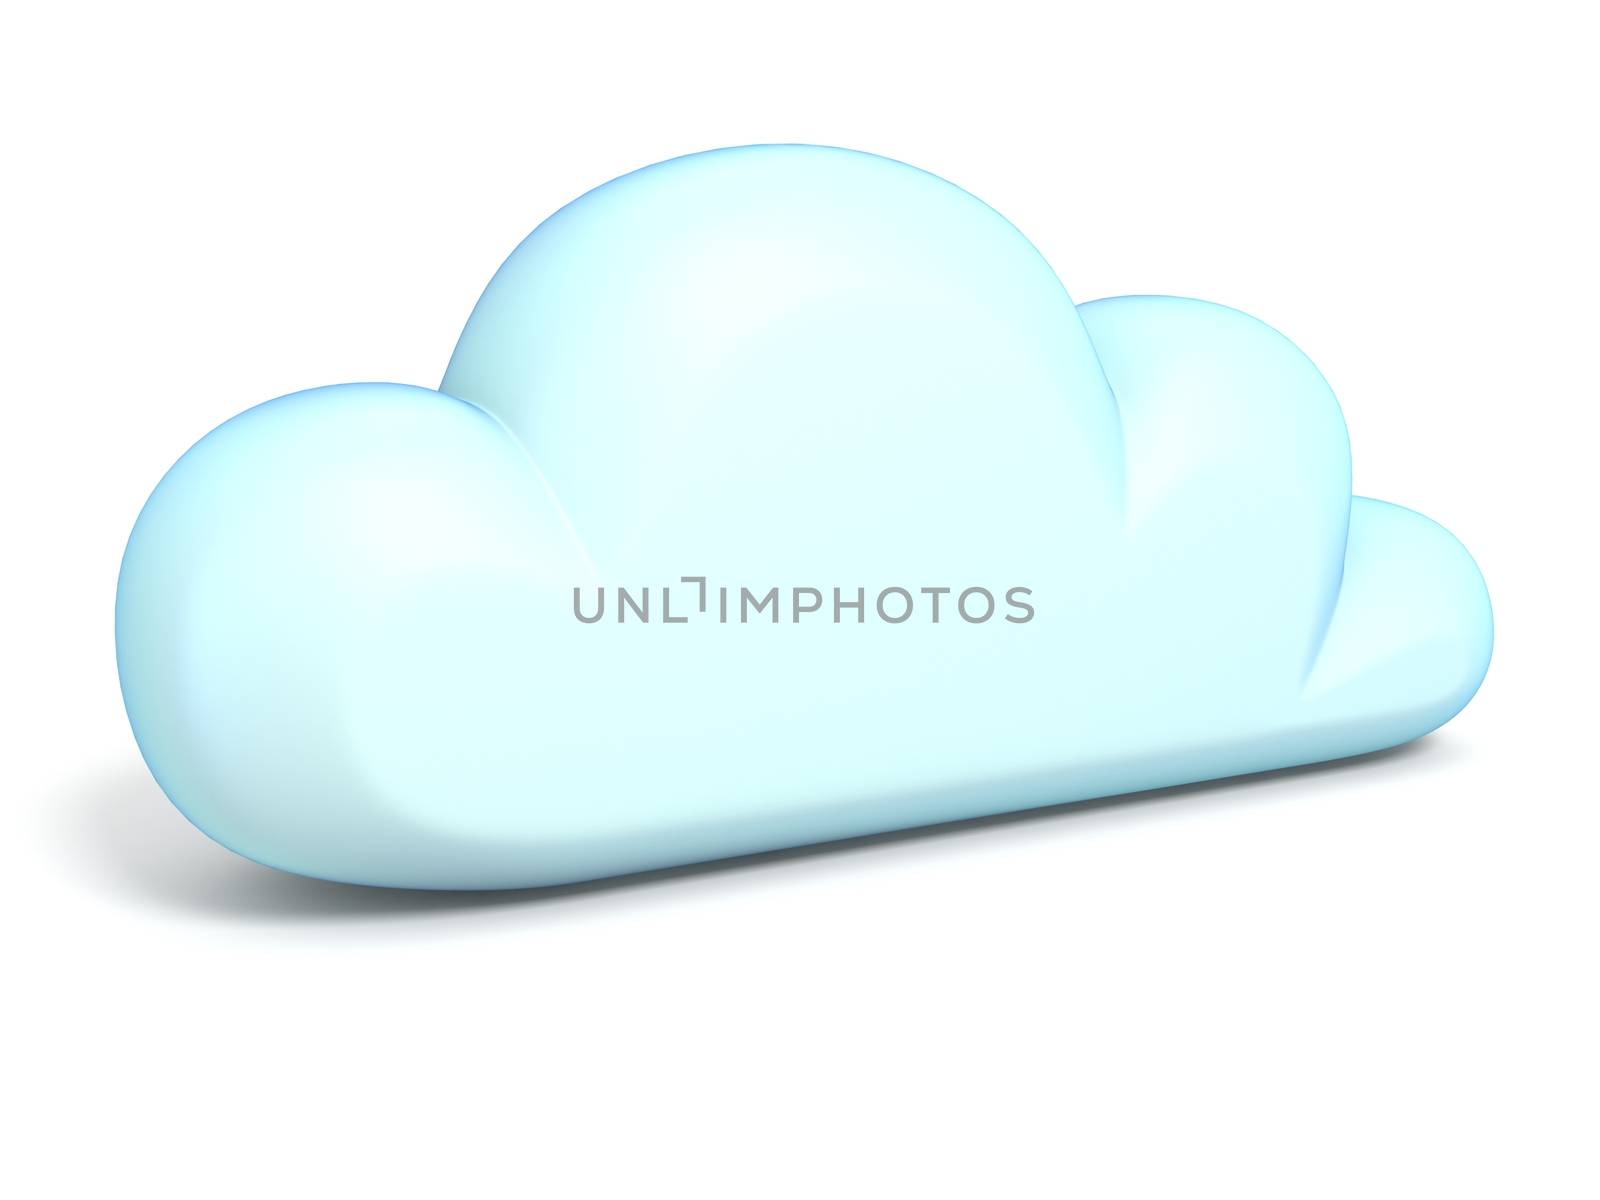 Cloud icon 3D rendering isolated on white background